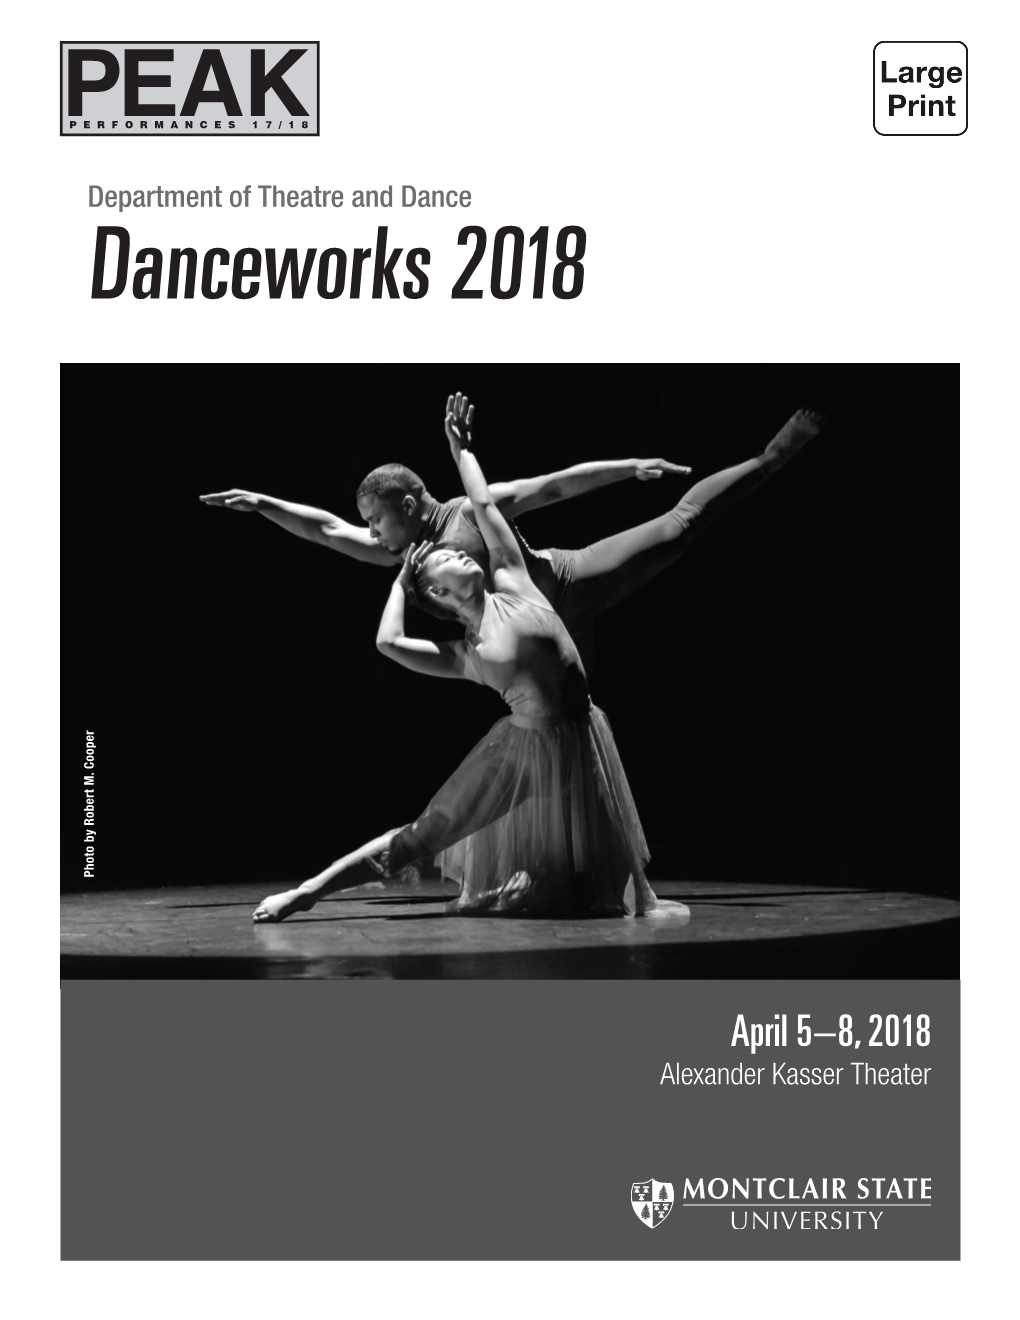 Department of Theatre and Dance Danceworks 2018 Photo by Robert M